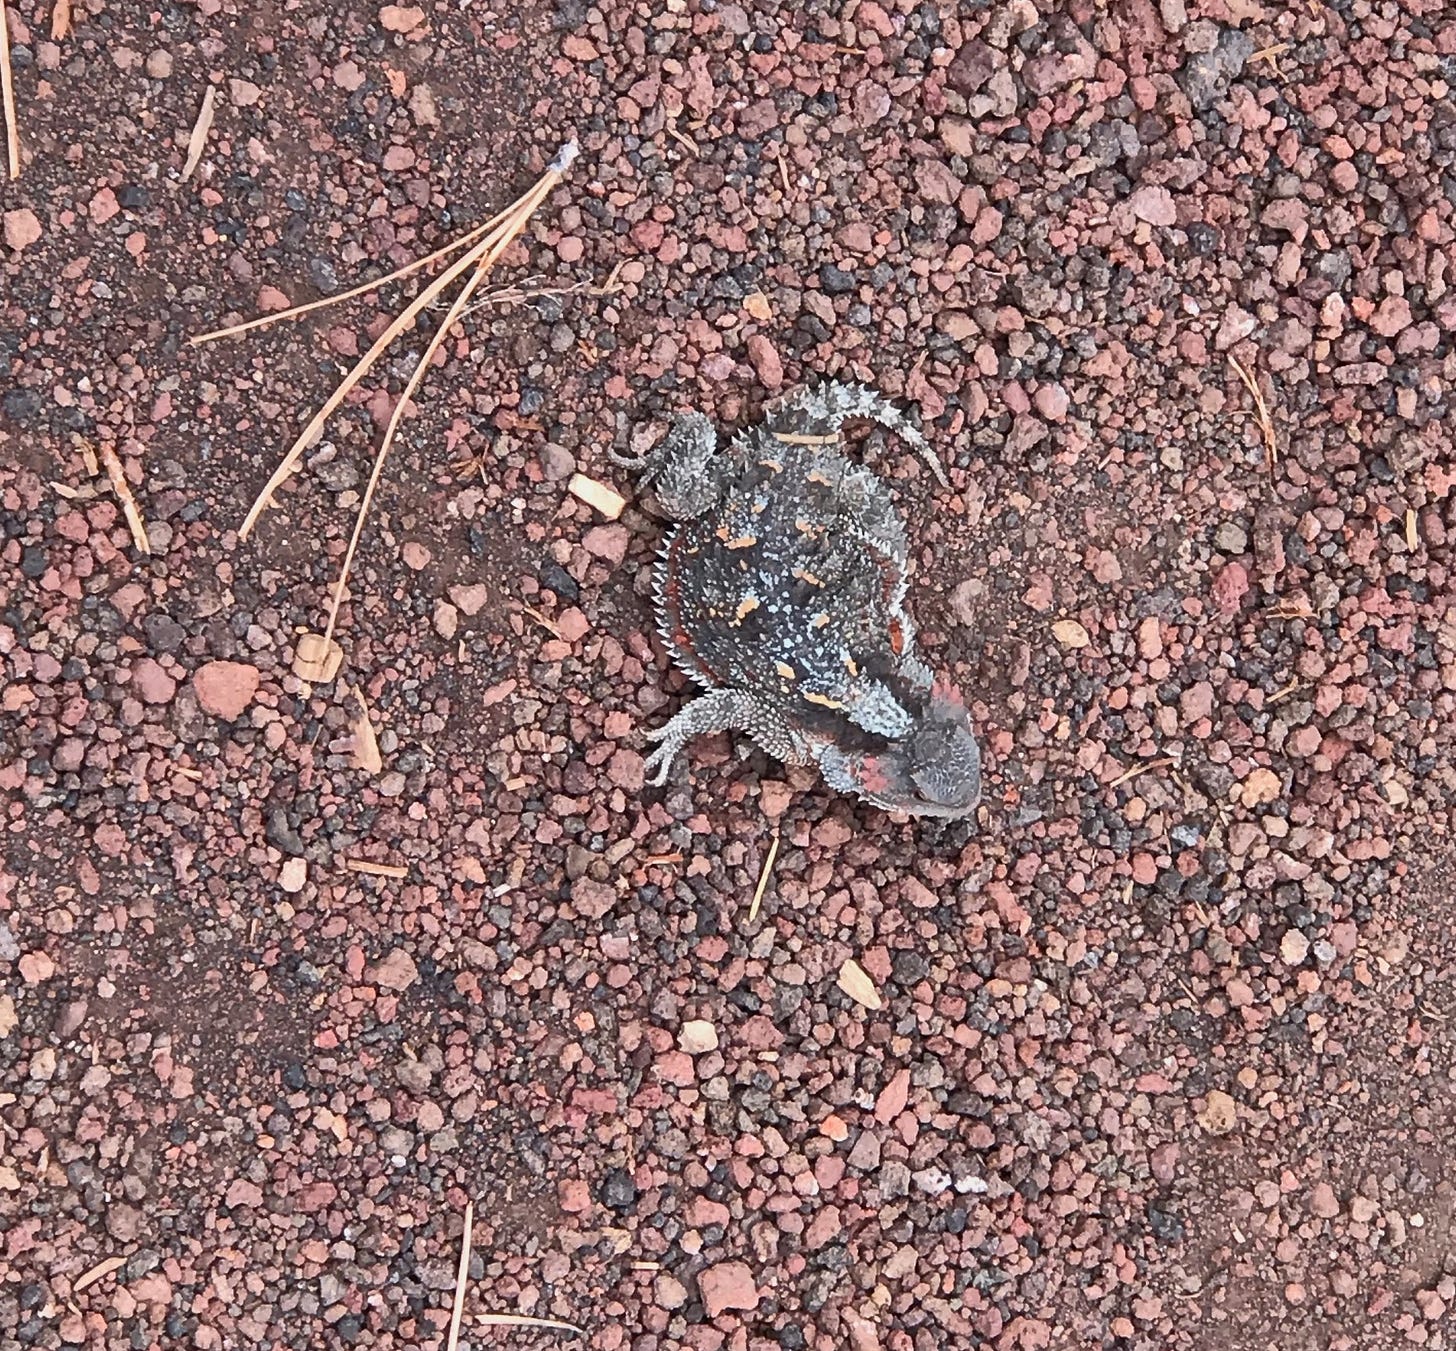 short horned lizard at Sunset Crater National Monument